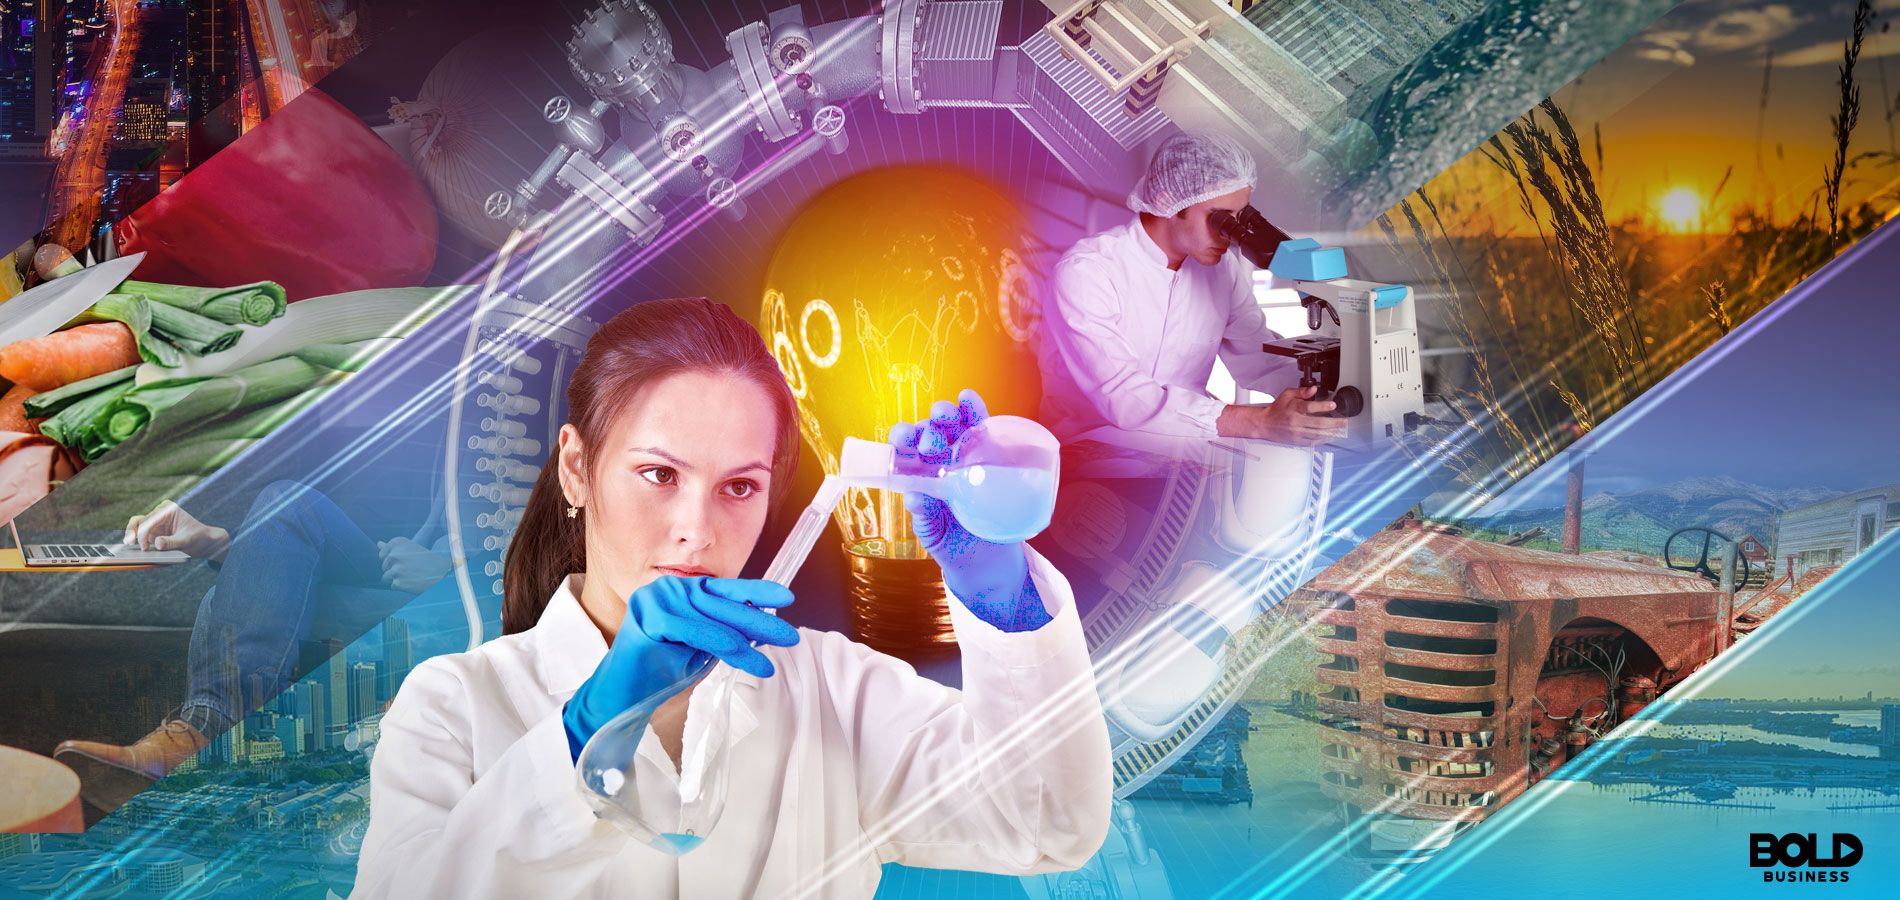 Combination of photos representing chemical industry and two scientists working in lab